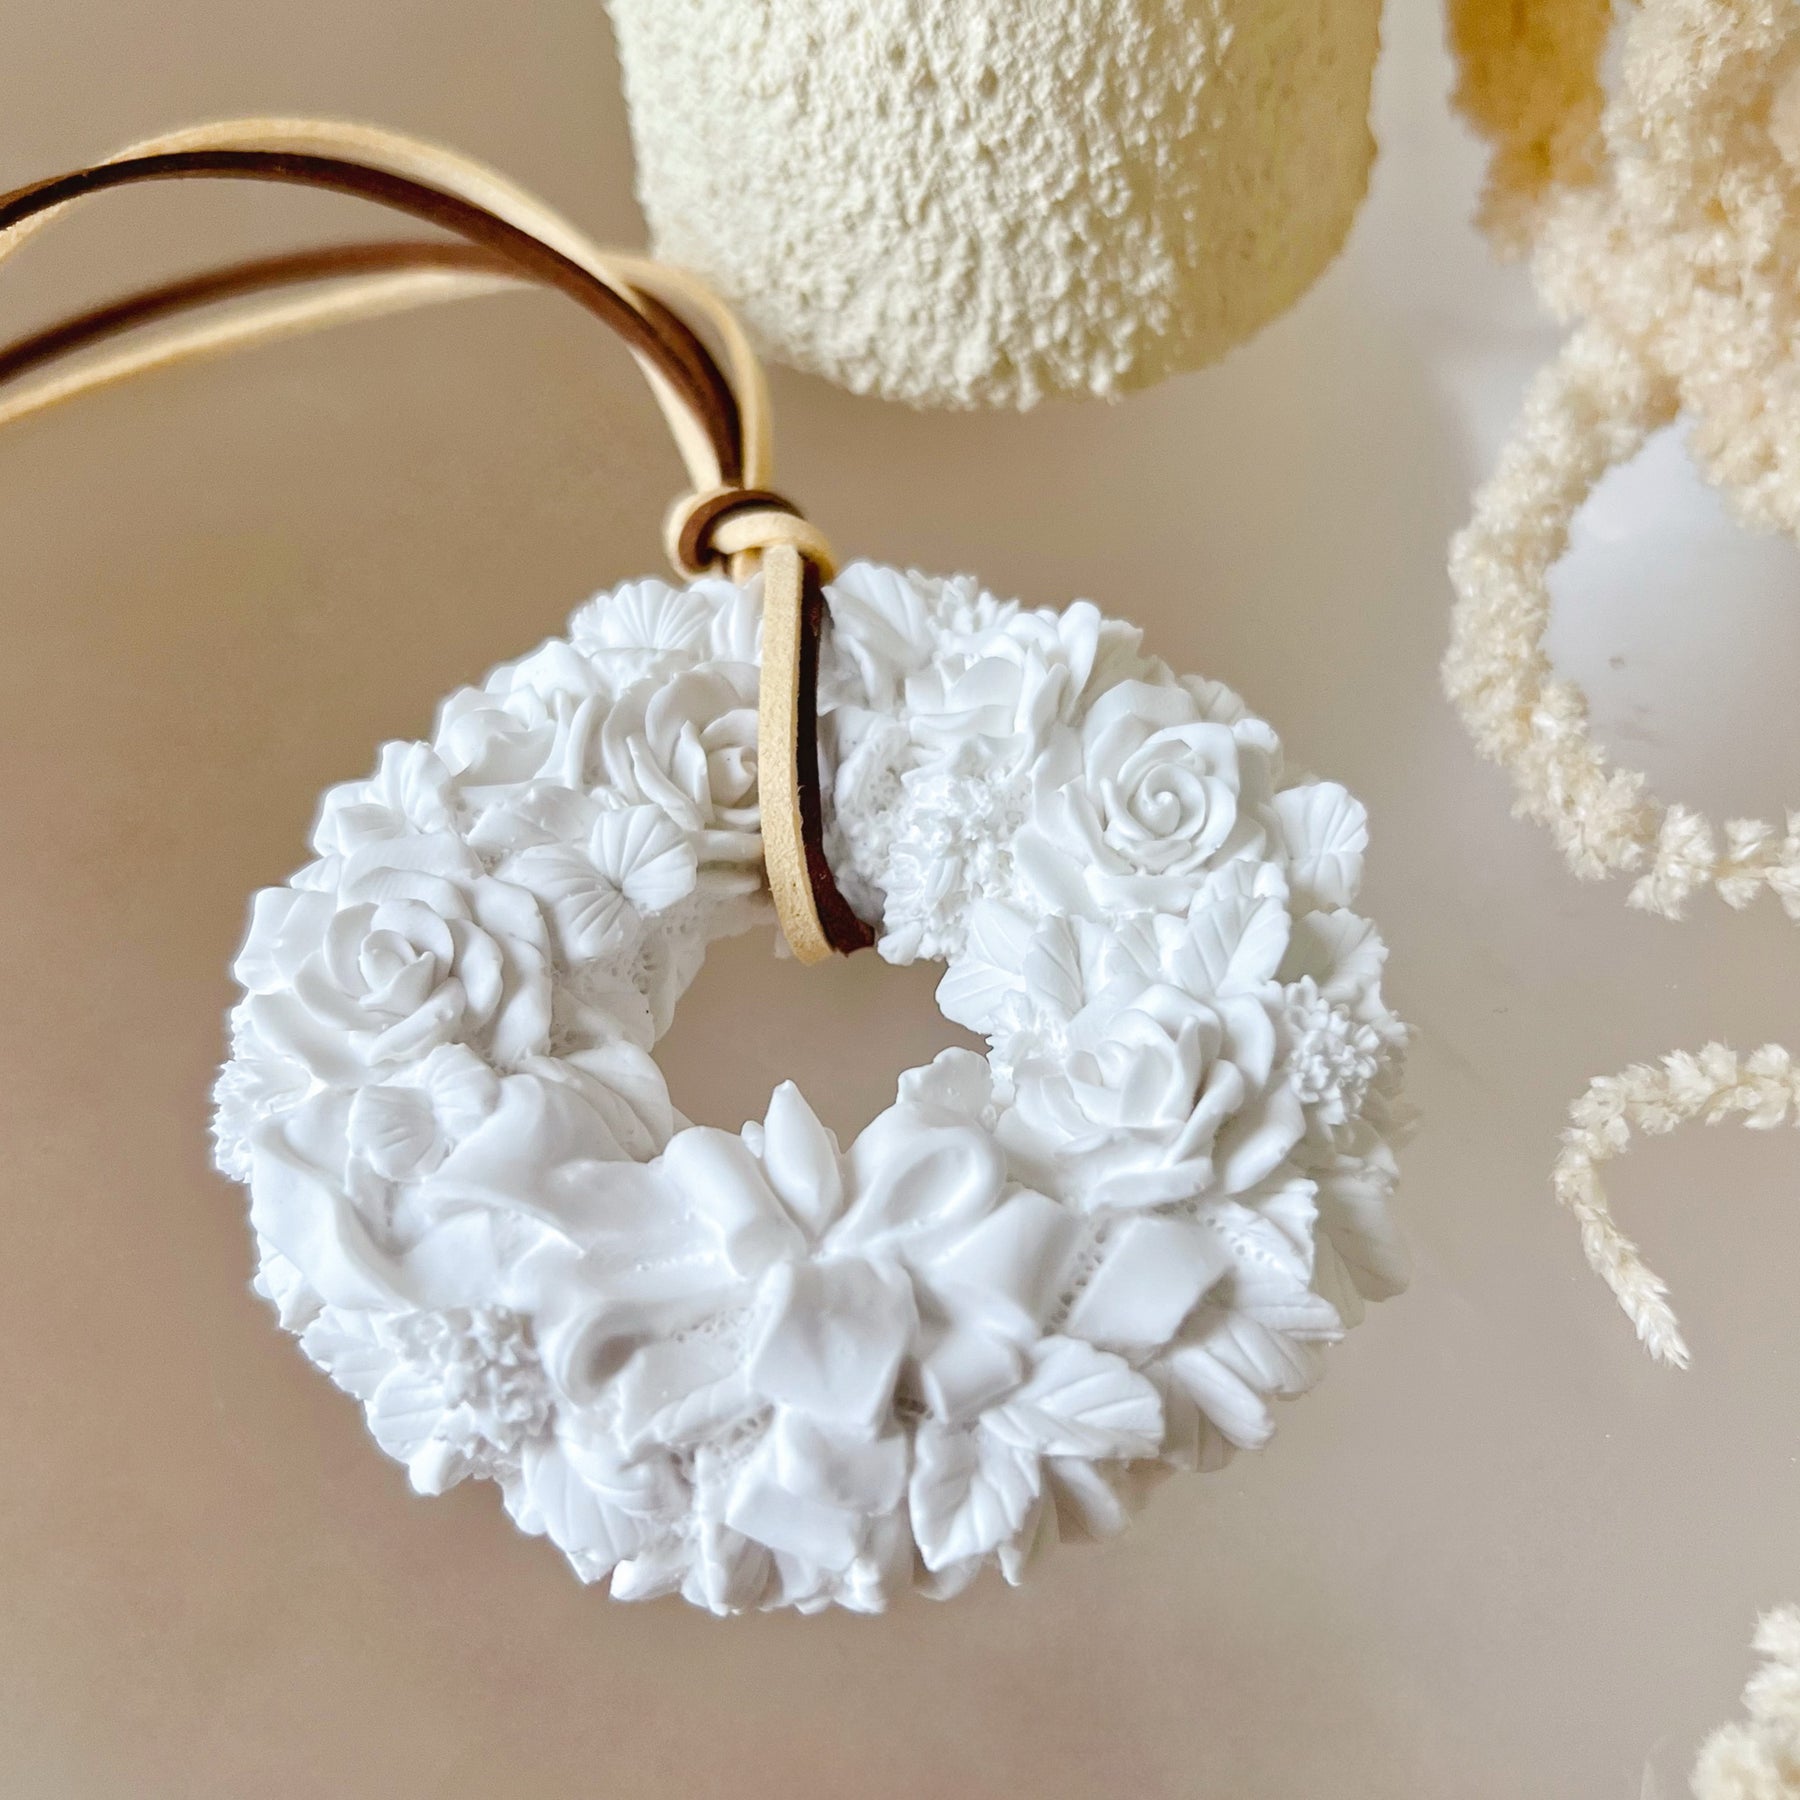 Rose Wreath Air Freshener | Home Hanging Diffuser | LMJ Candles